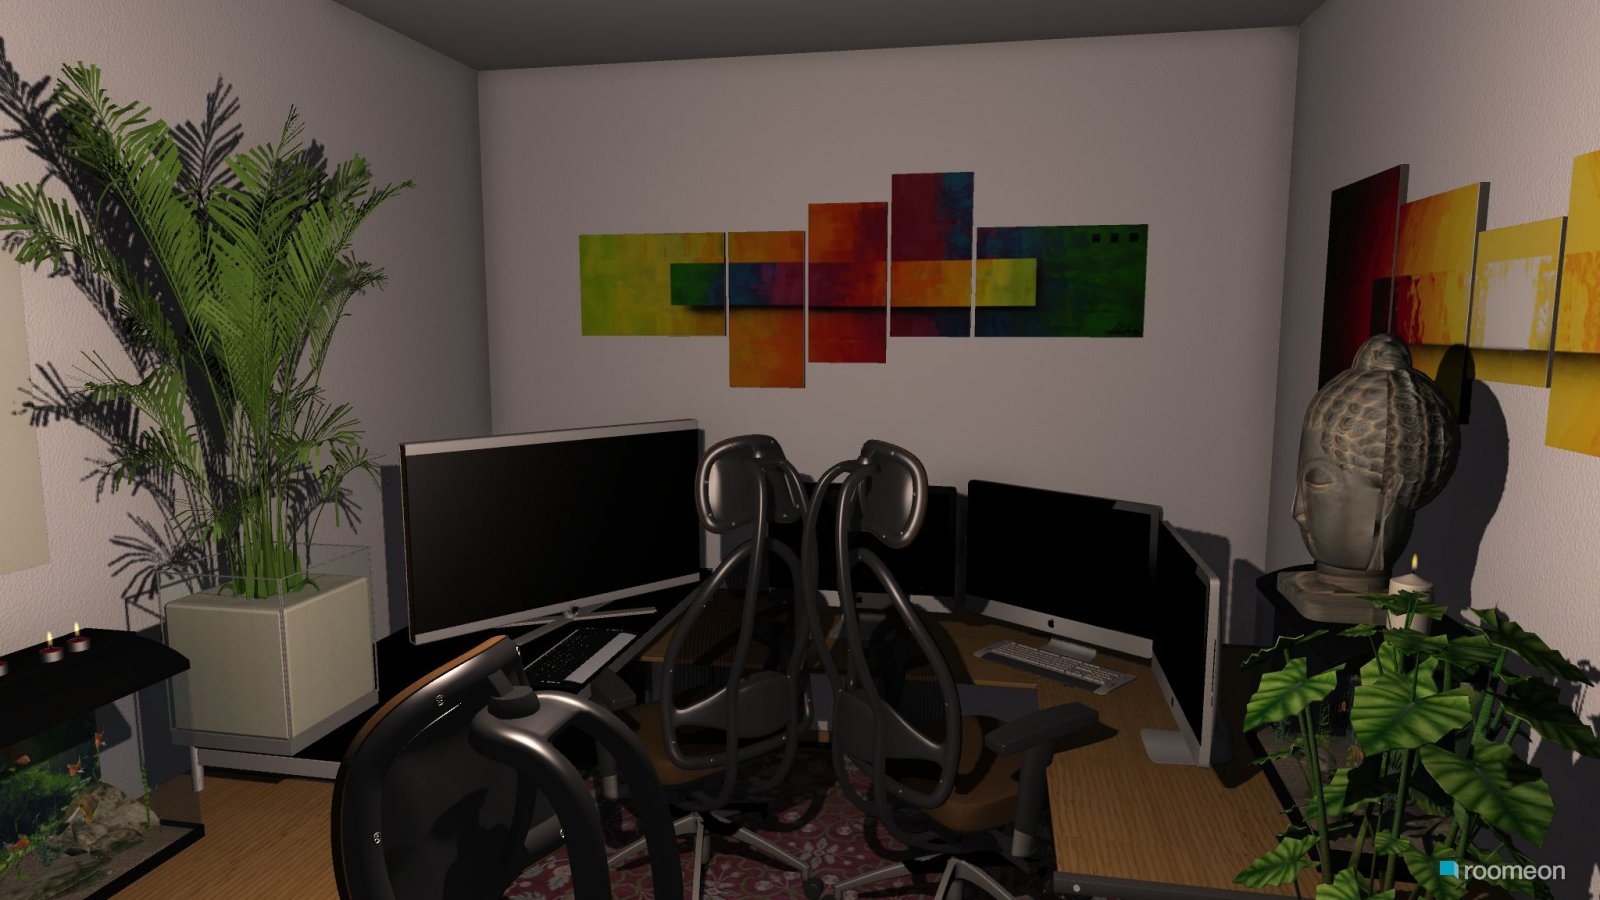 Room Design gaming zimmer turbenthal - roomeon Community